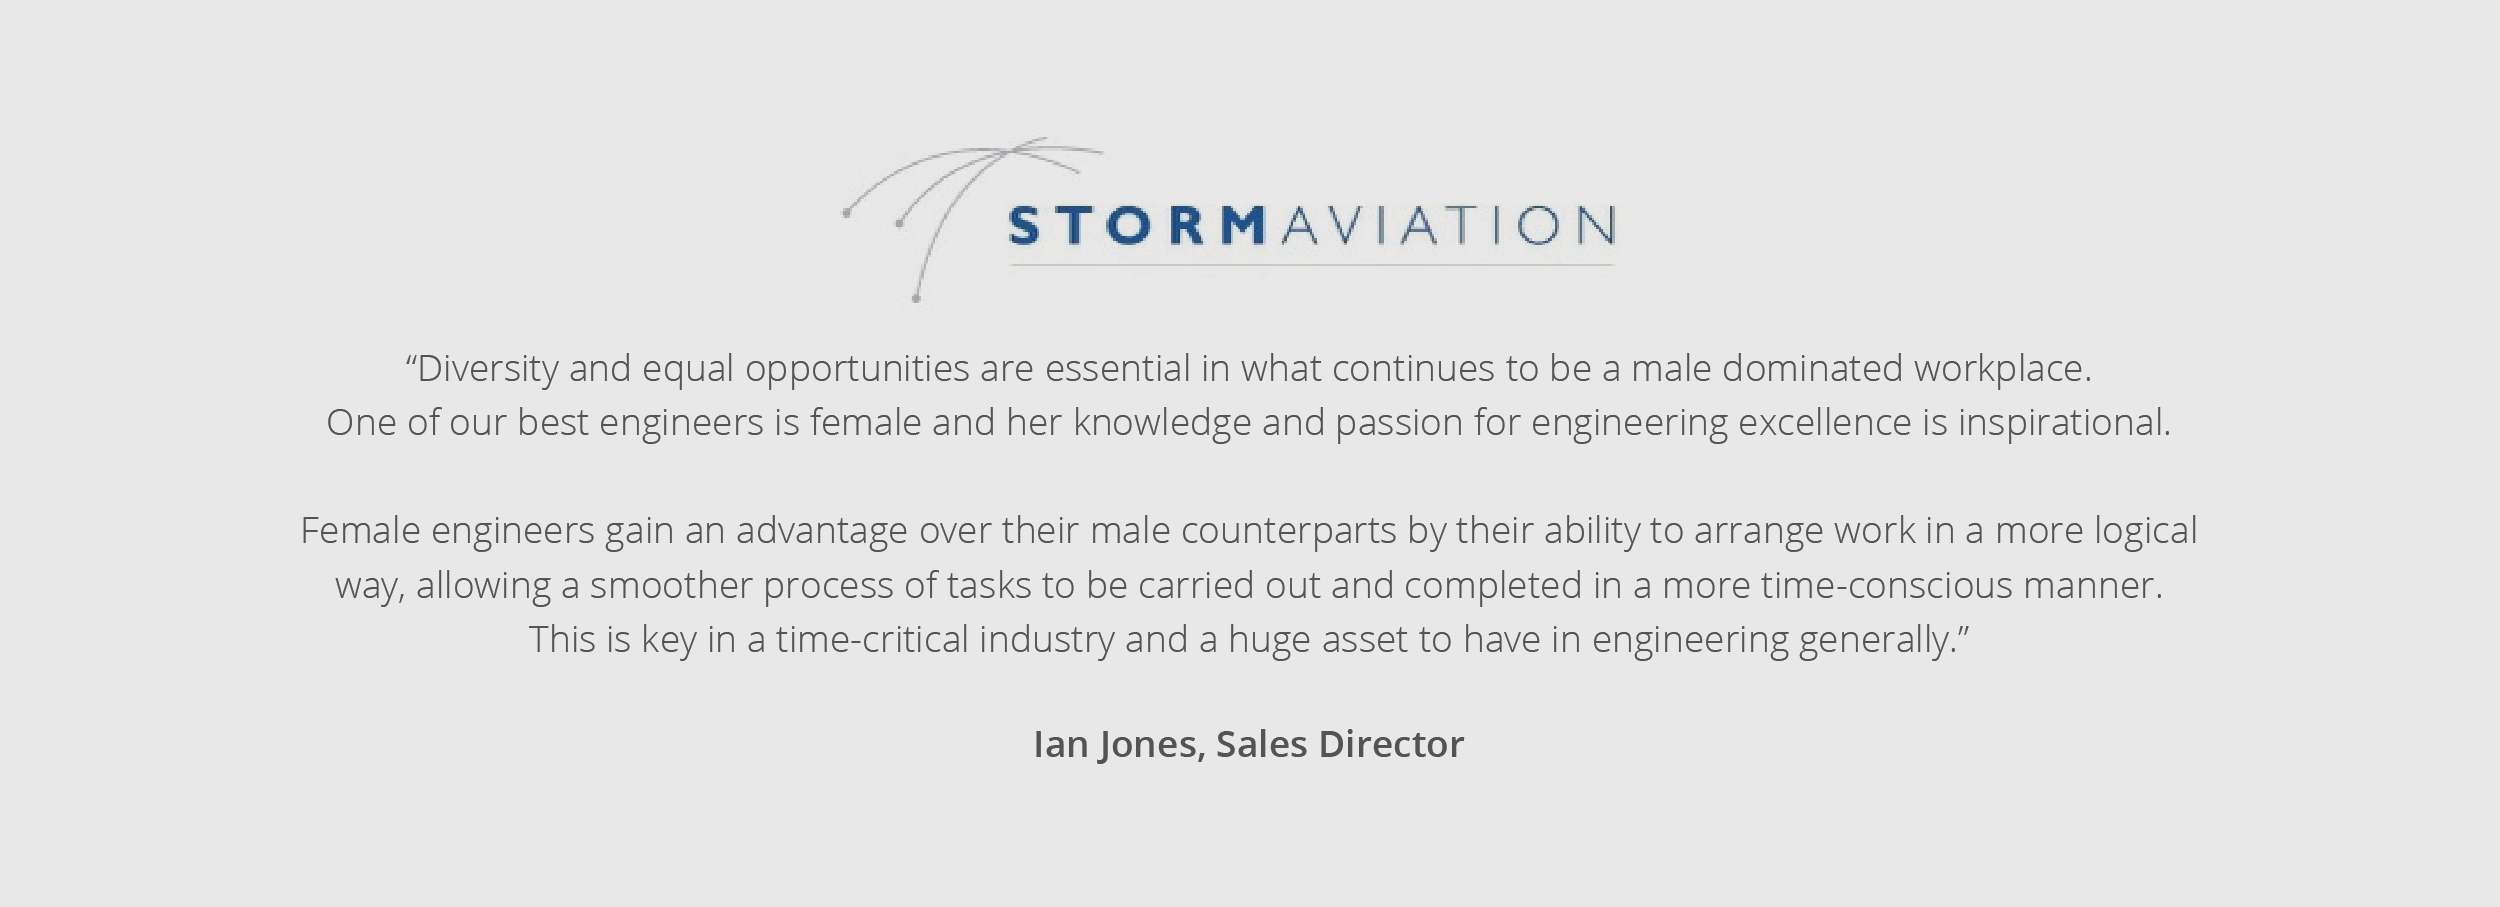 Storm Aviation quote